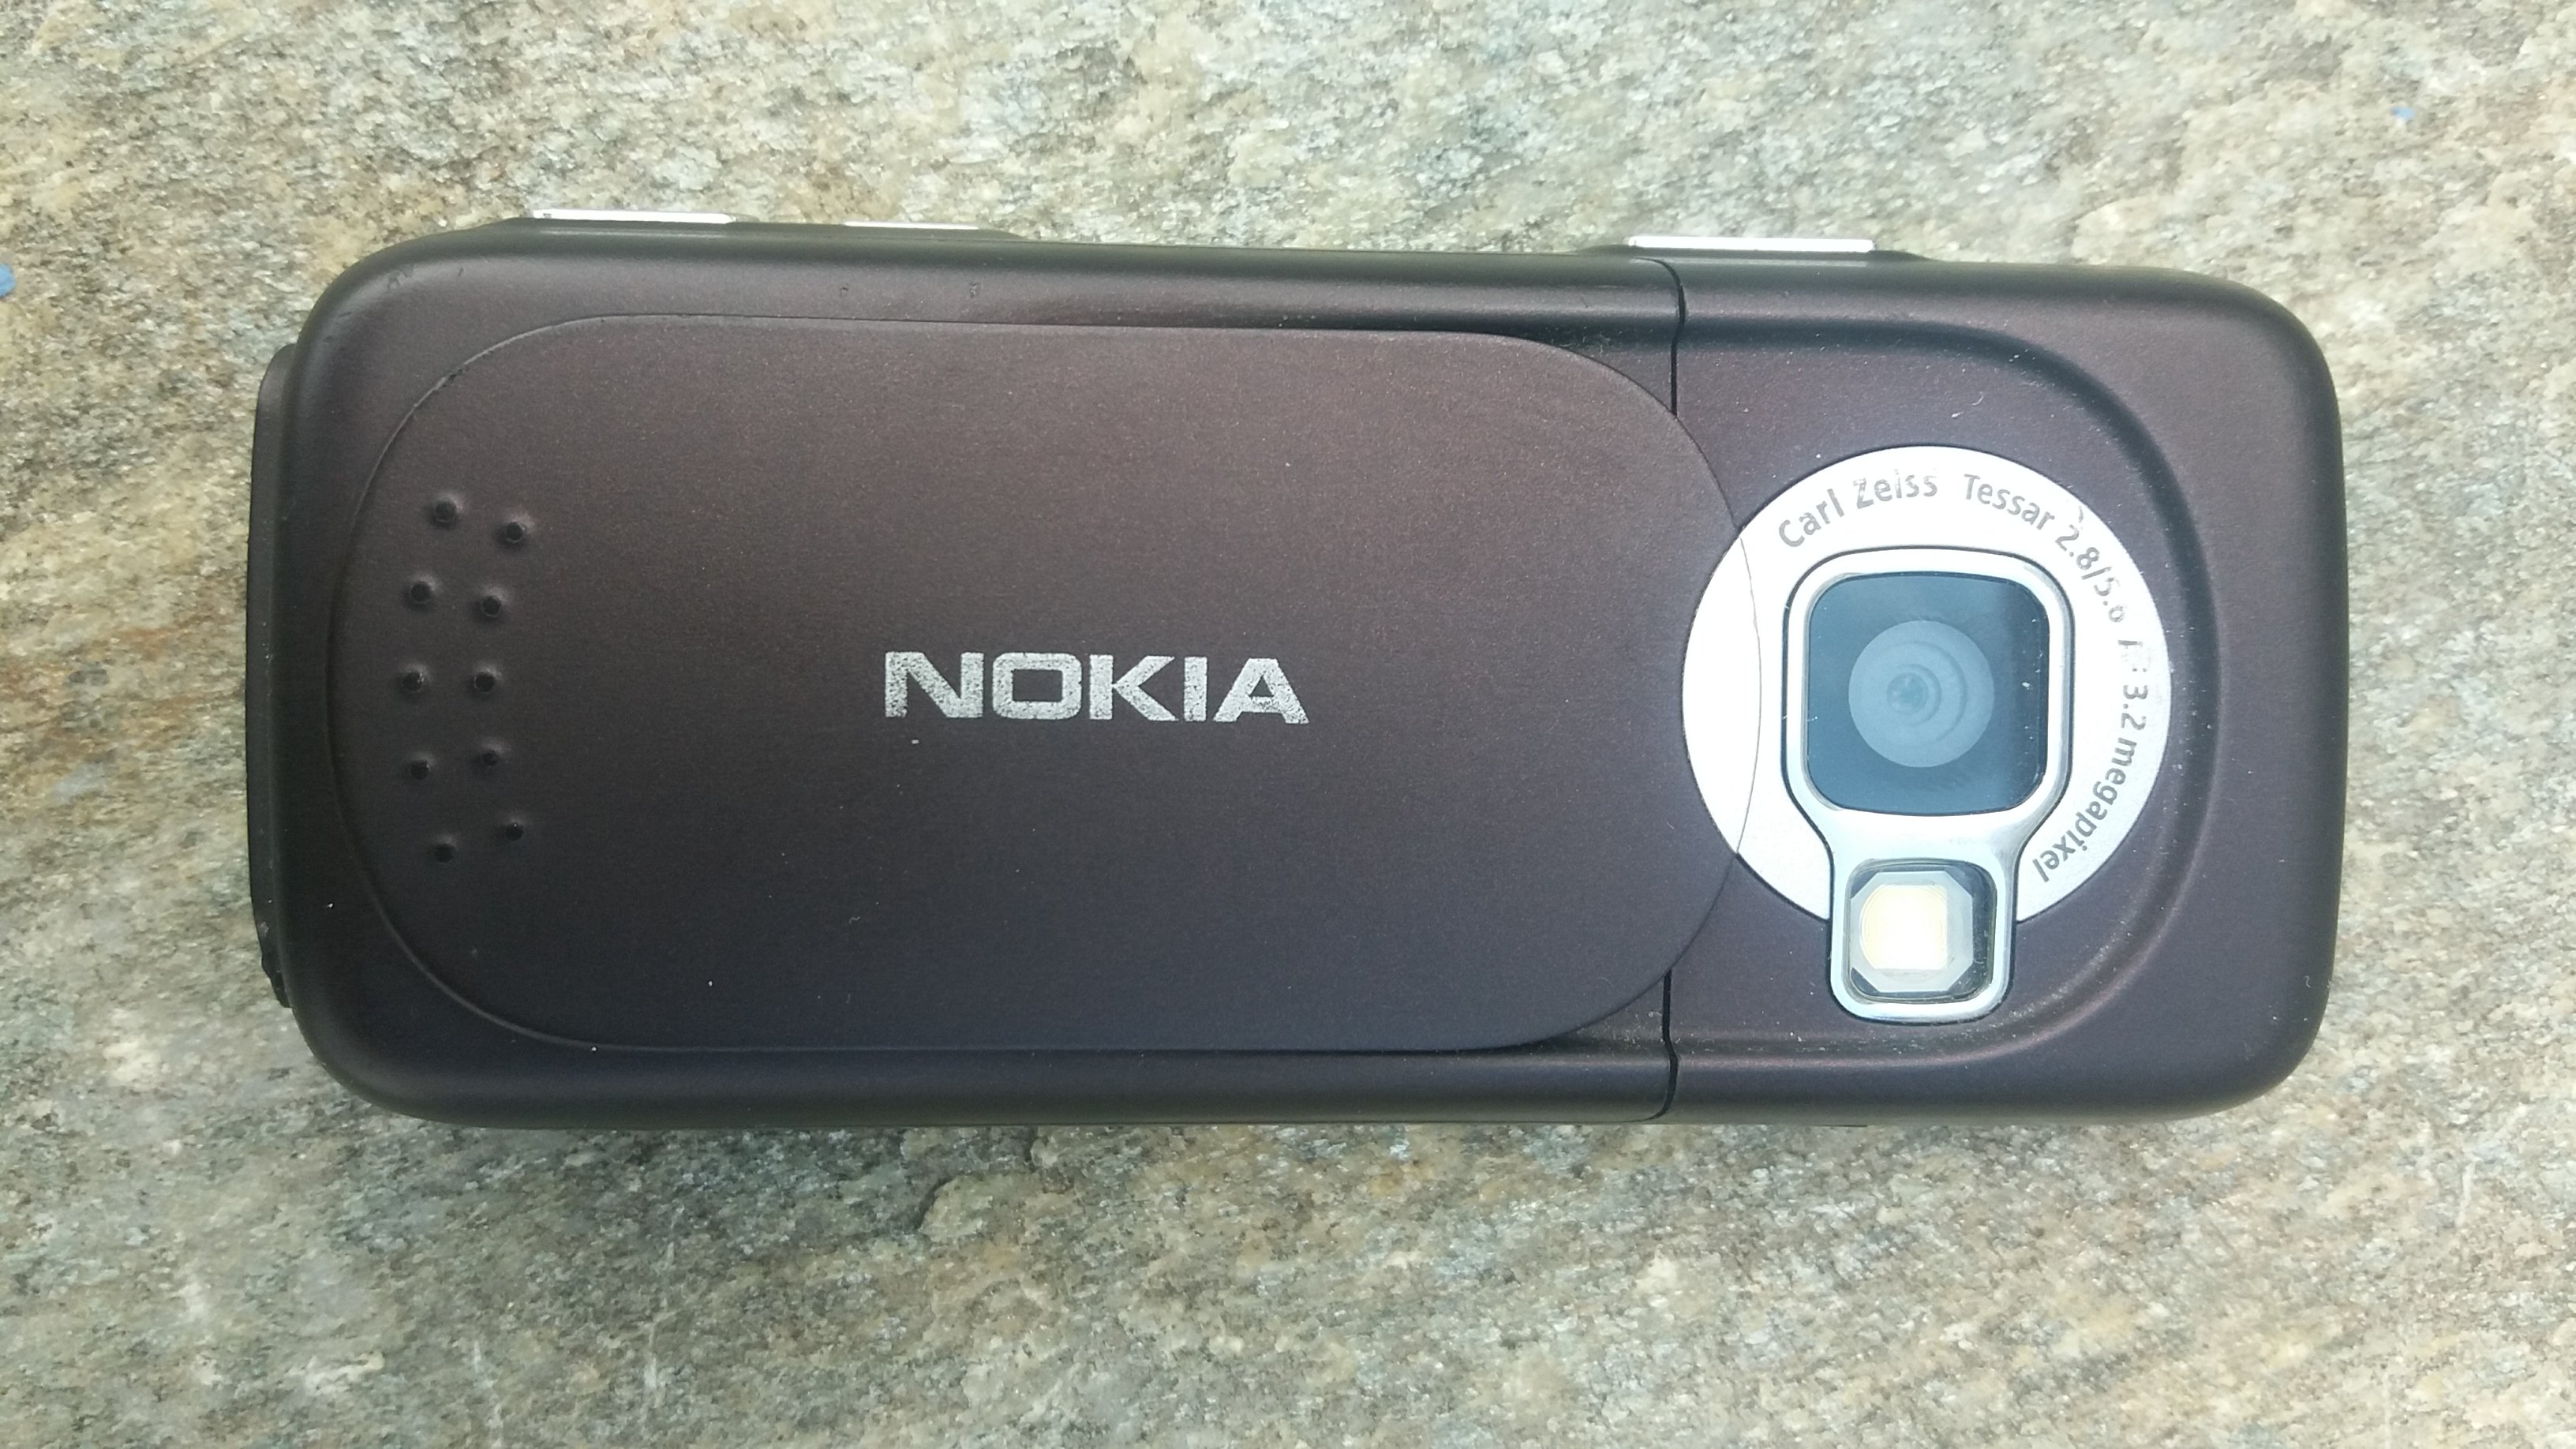 More information about "Nokia N73"